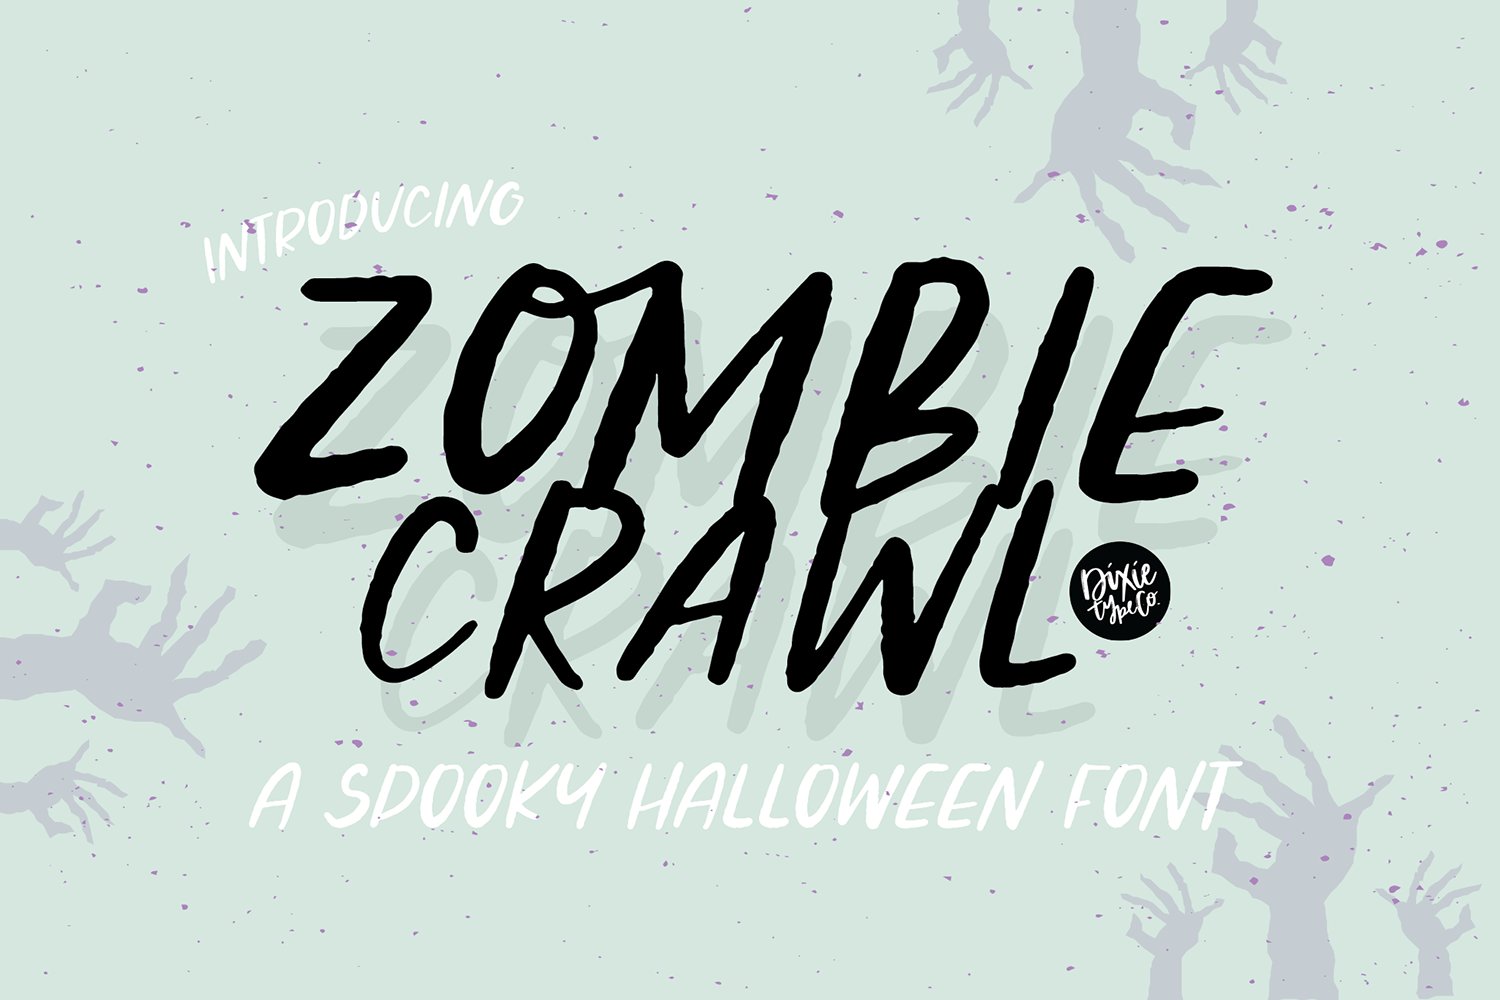 ZOMBIE CRAWL Halloween Font cover image.